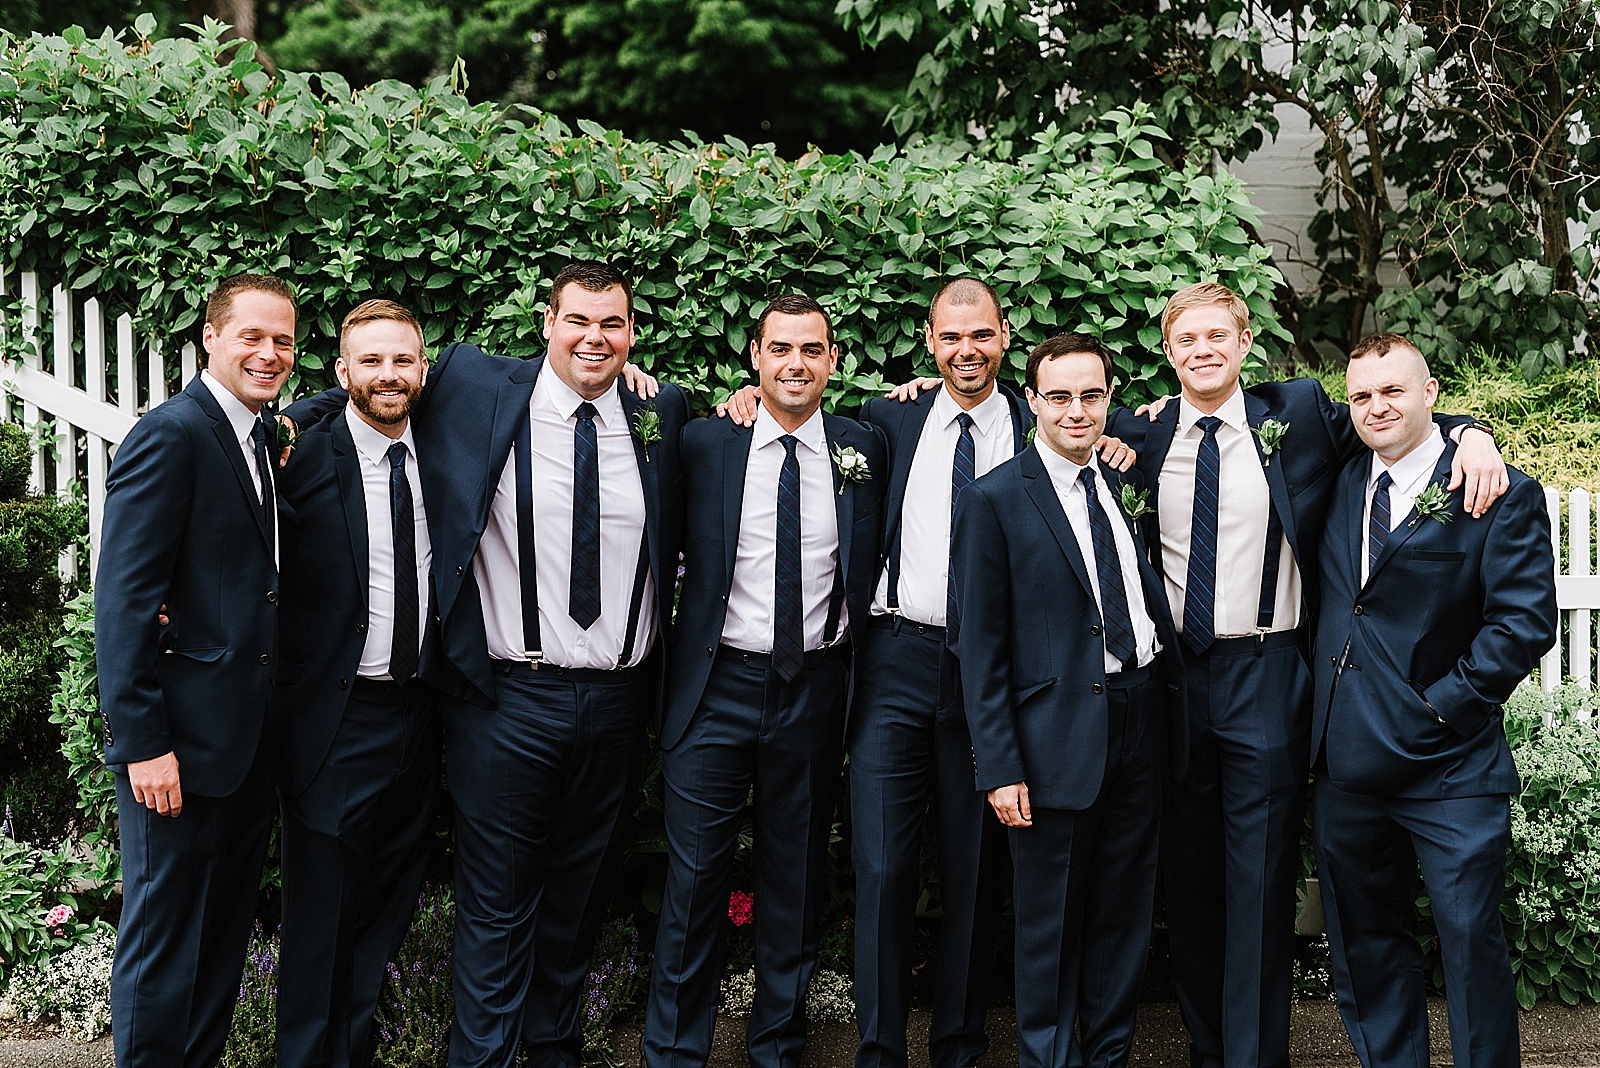 Summer Wedding at The Commons 1854 in Topsfield, MA by Boston Wedding Photographer Annmarie Swift